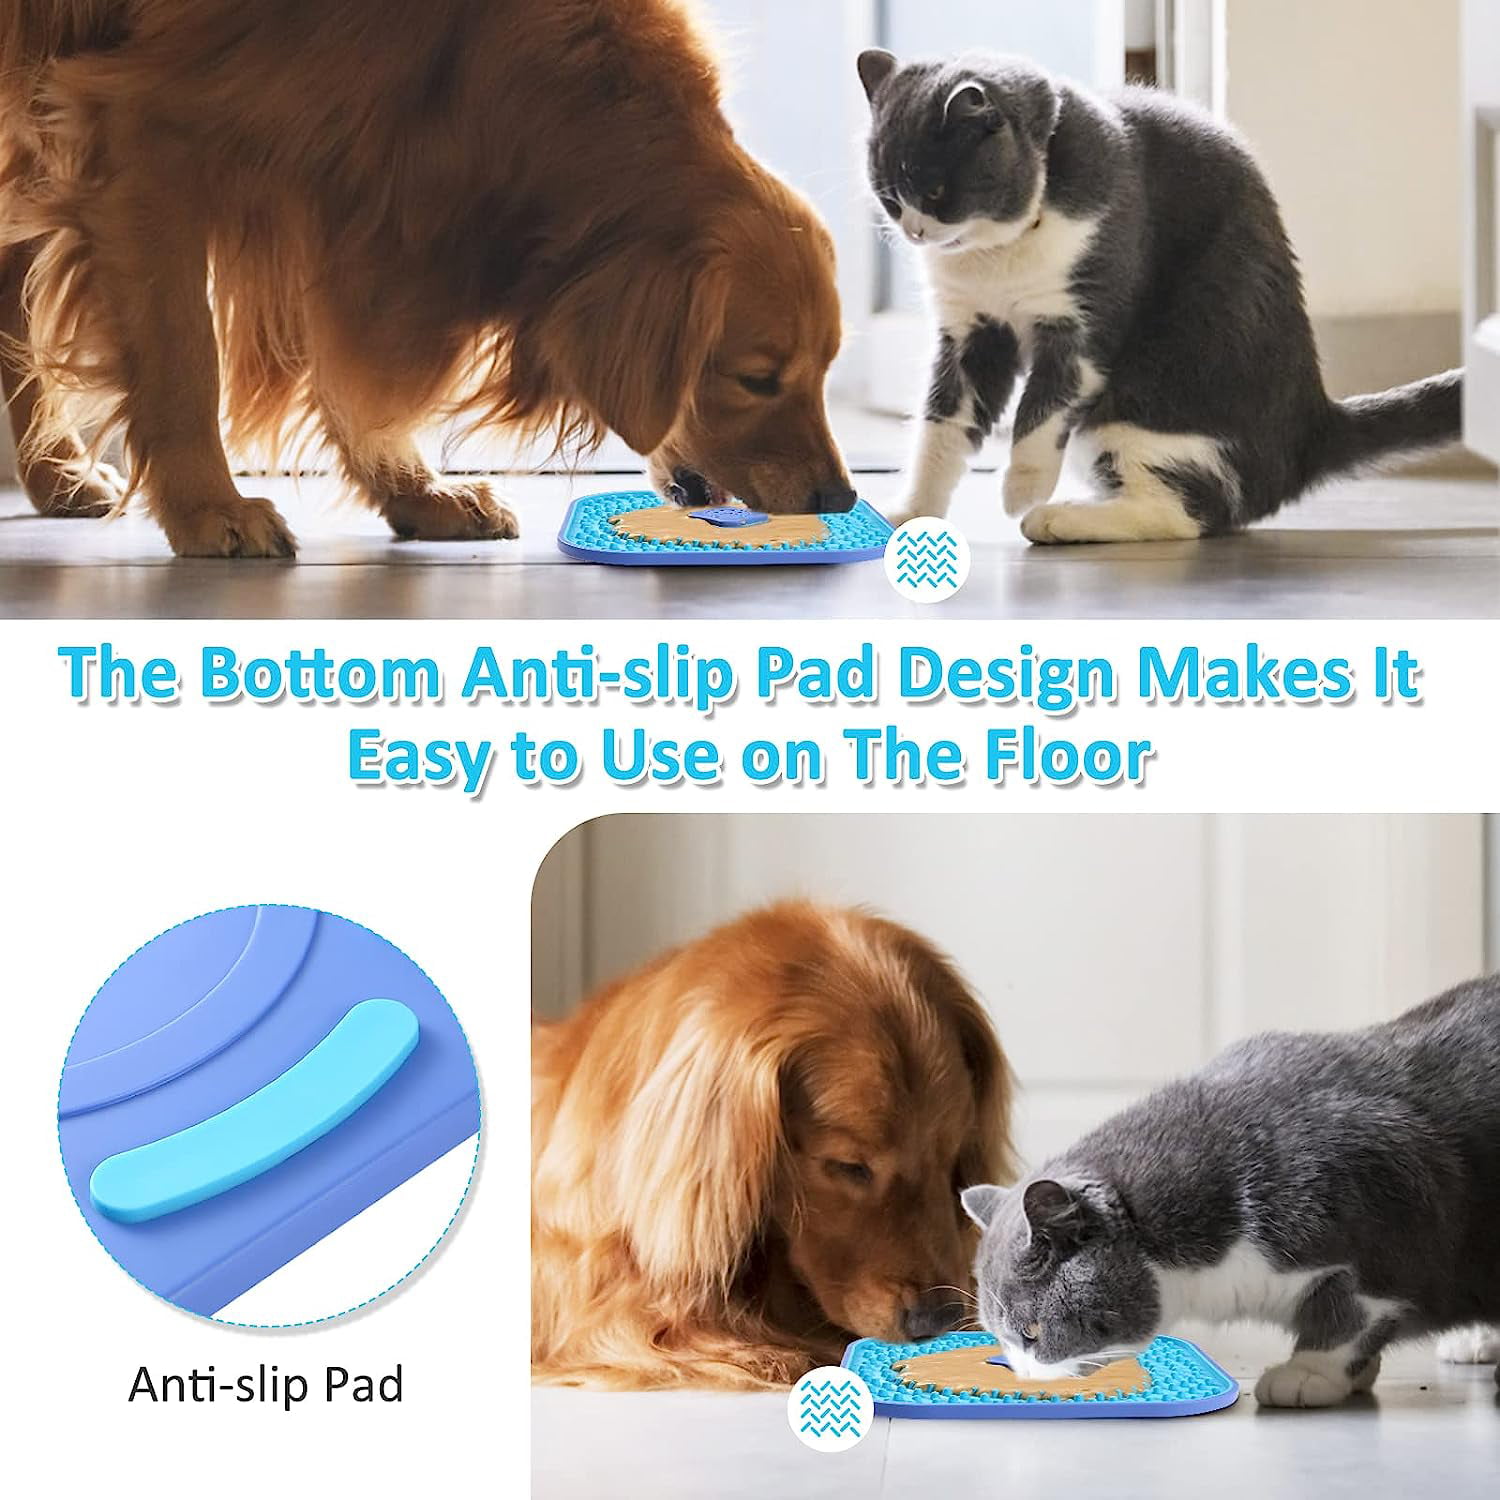 Lick Mat for Dogs, Dog Crate Lick Pads Slow Feeder, Lick Pad Crate Training  Toy Crate Lick Plate,Very Suitable Peanut Butter, Treats Yogurt